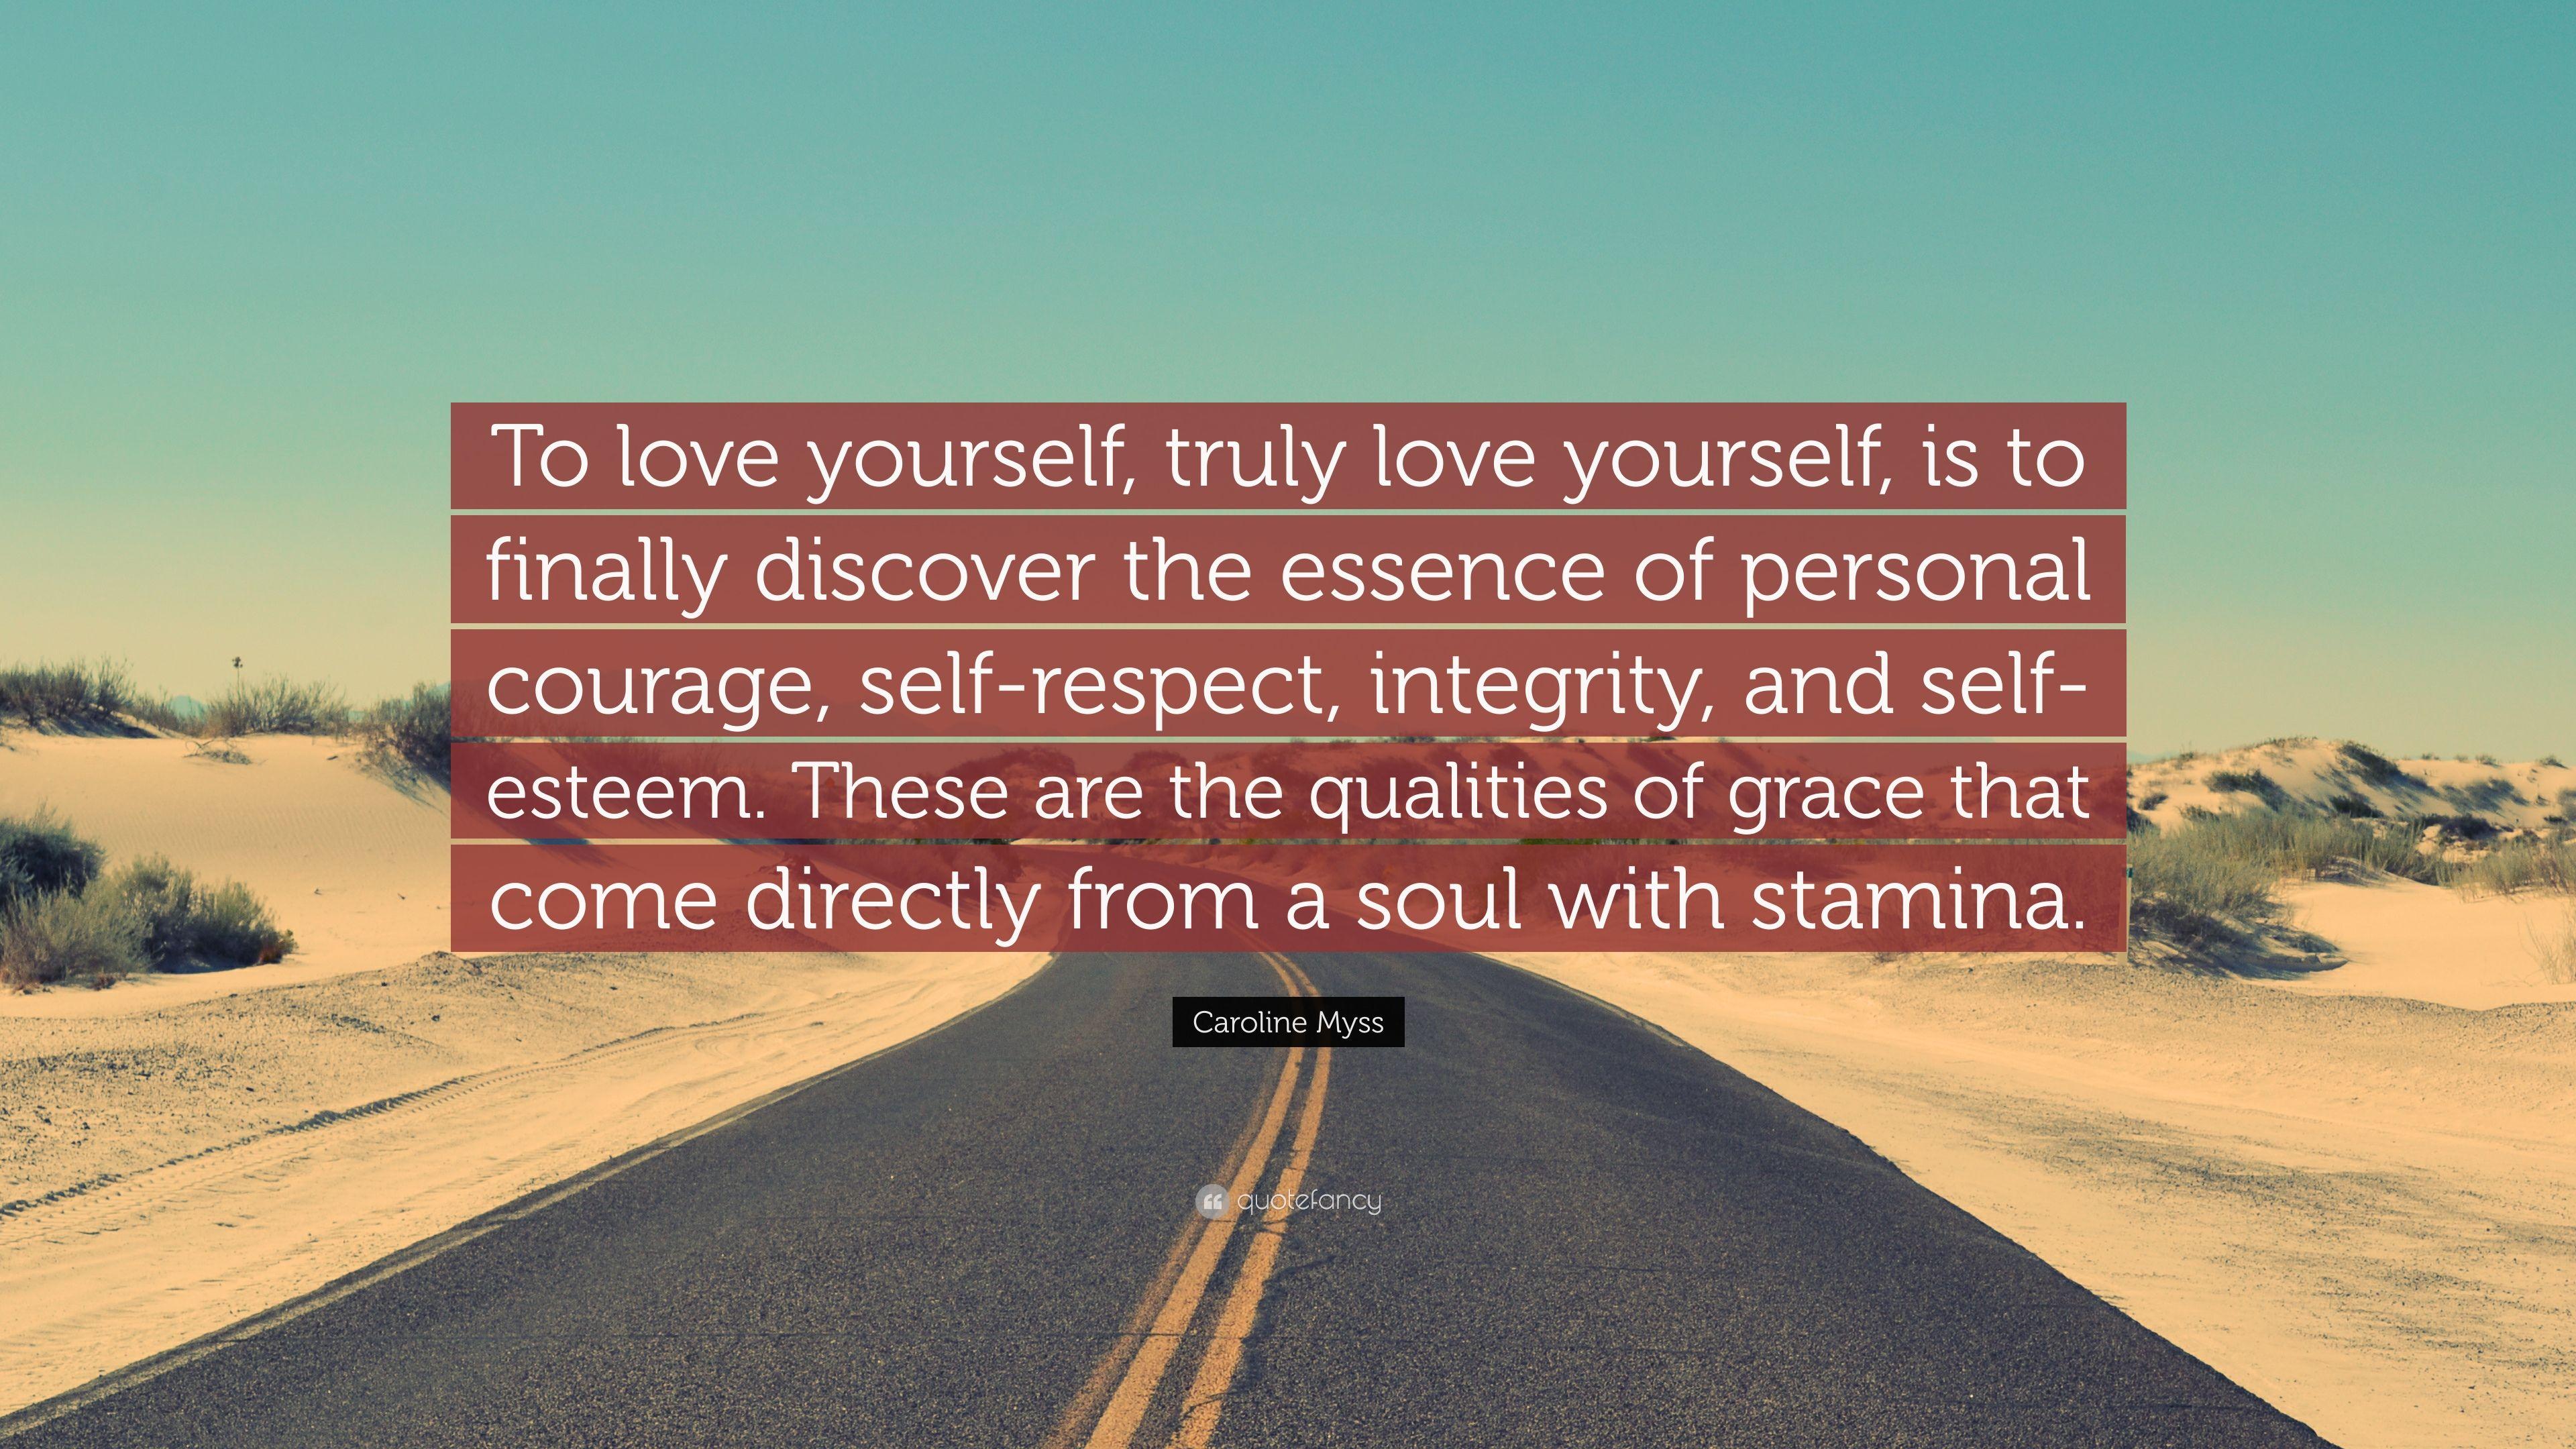 Caroline Myss Quote: “To love yourself, truly love yourself, is to